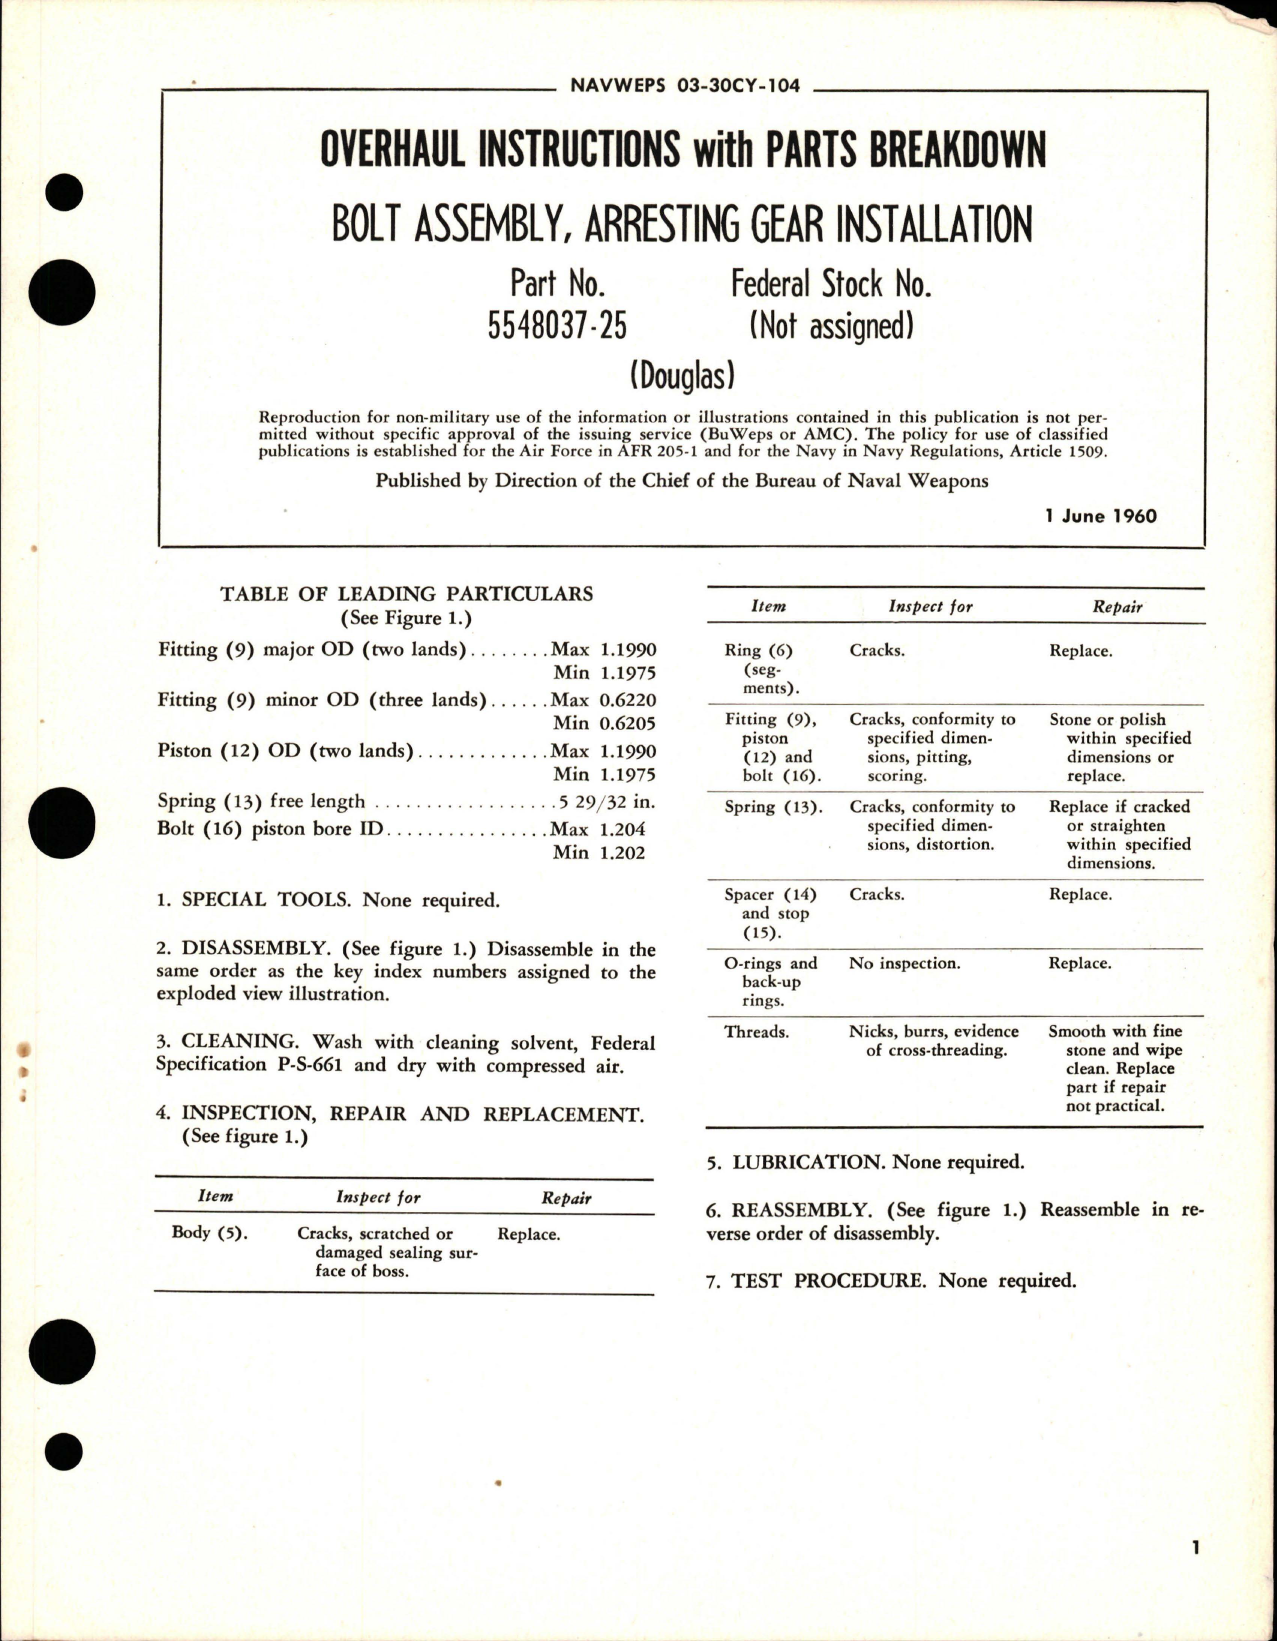 Sample page 1 from AirCorps Library document: Overhaul Instructions with Parts Breakdown for Arresting Gear Unlock Hydraulic Cylinder